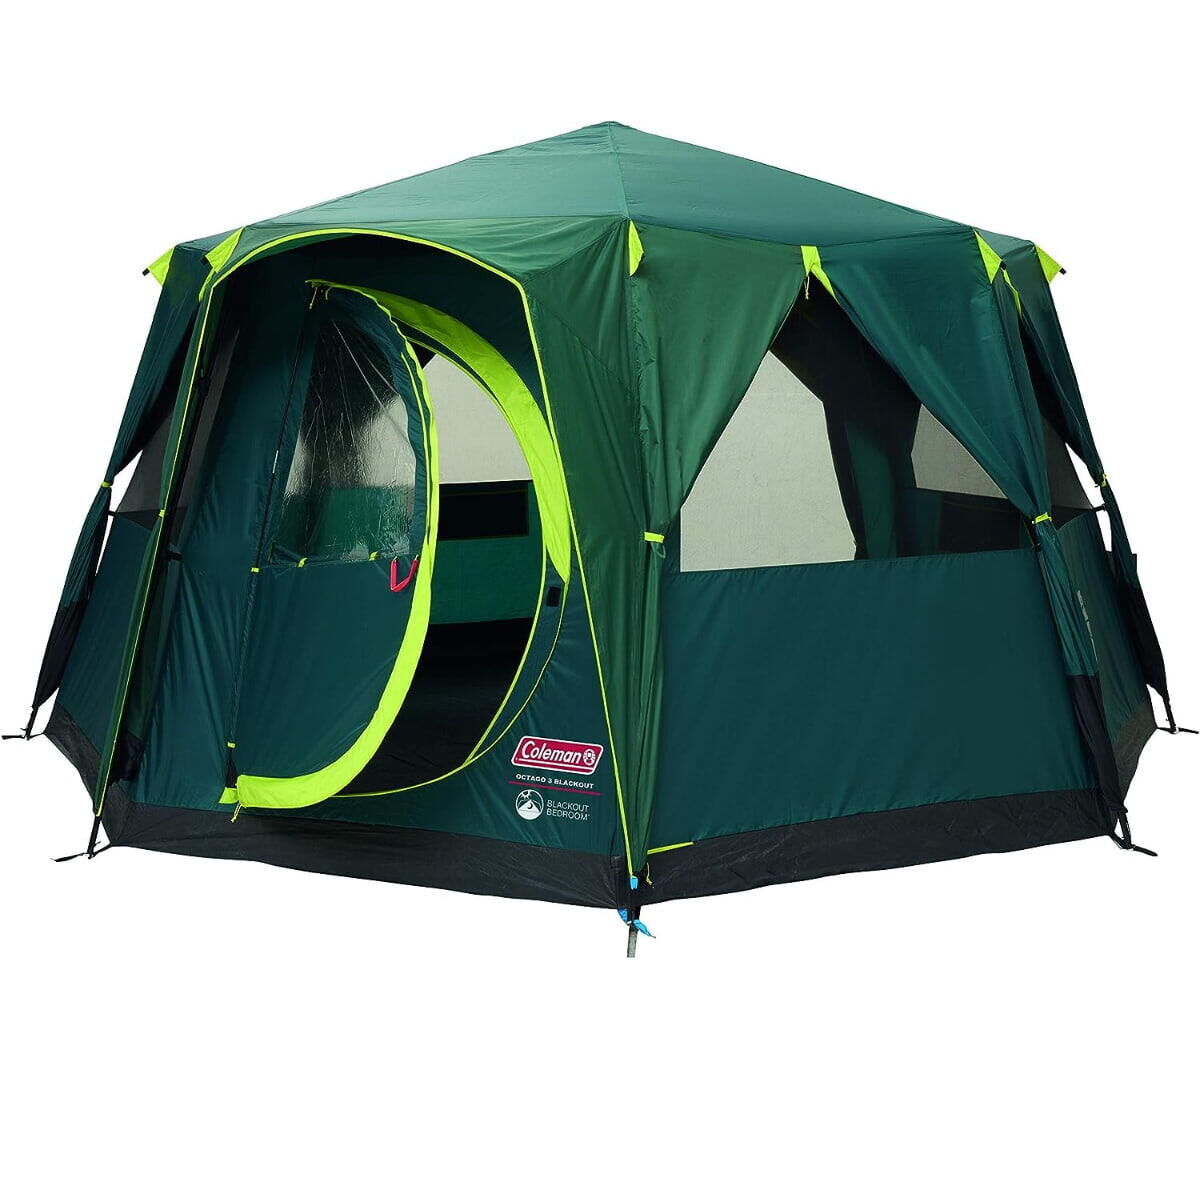 COLEMAN Coleman OctaGon 8-Person Glamping Tent with Sewn-in Groundsheet